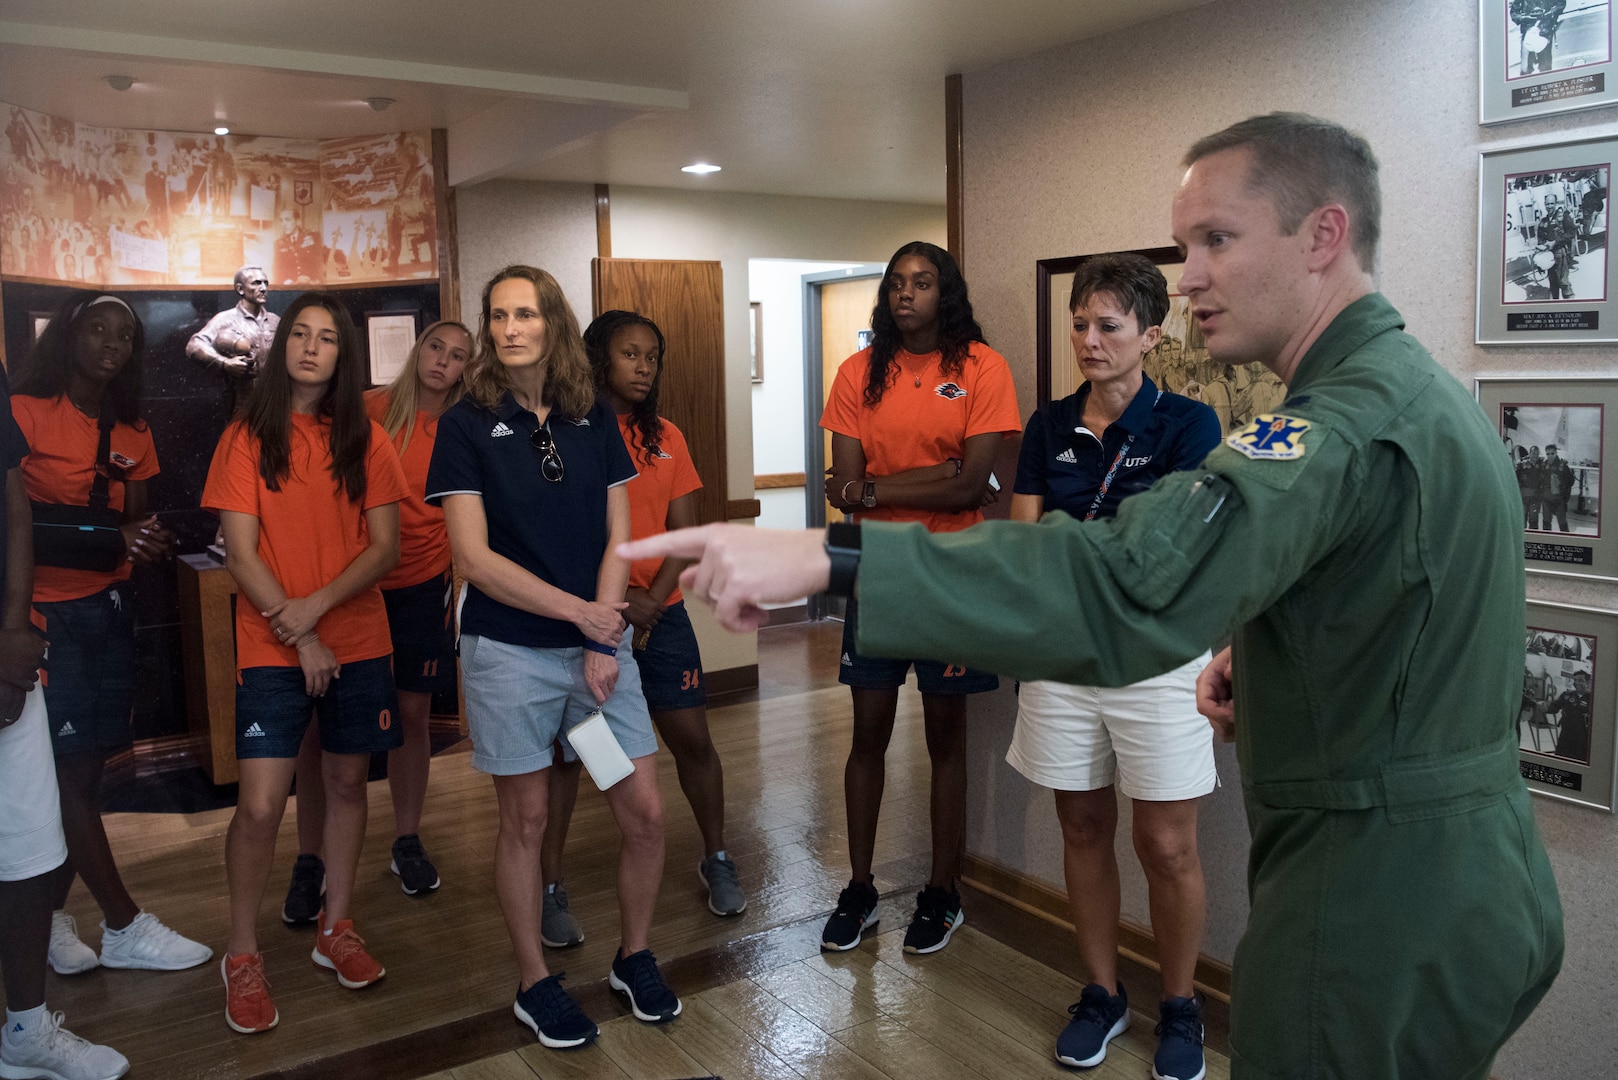 Members of the University of Texas San Antonio Women’s Basketball Team take a tour of the 560th Flying Training Squadron with Lt. Col. Matt Strohmeyer, 560th FTS commander Sept. 25, 2018, at Joint Base San Antonio-Randolph, Texas. The 560th Flying Training Squadron qualifies fighter and bomber pilots as instructor pilots in the T-38C Talon. (U.S. Air Force photo by Senior Airman Stormy Archer)